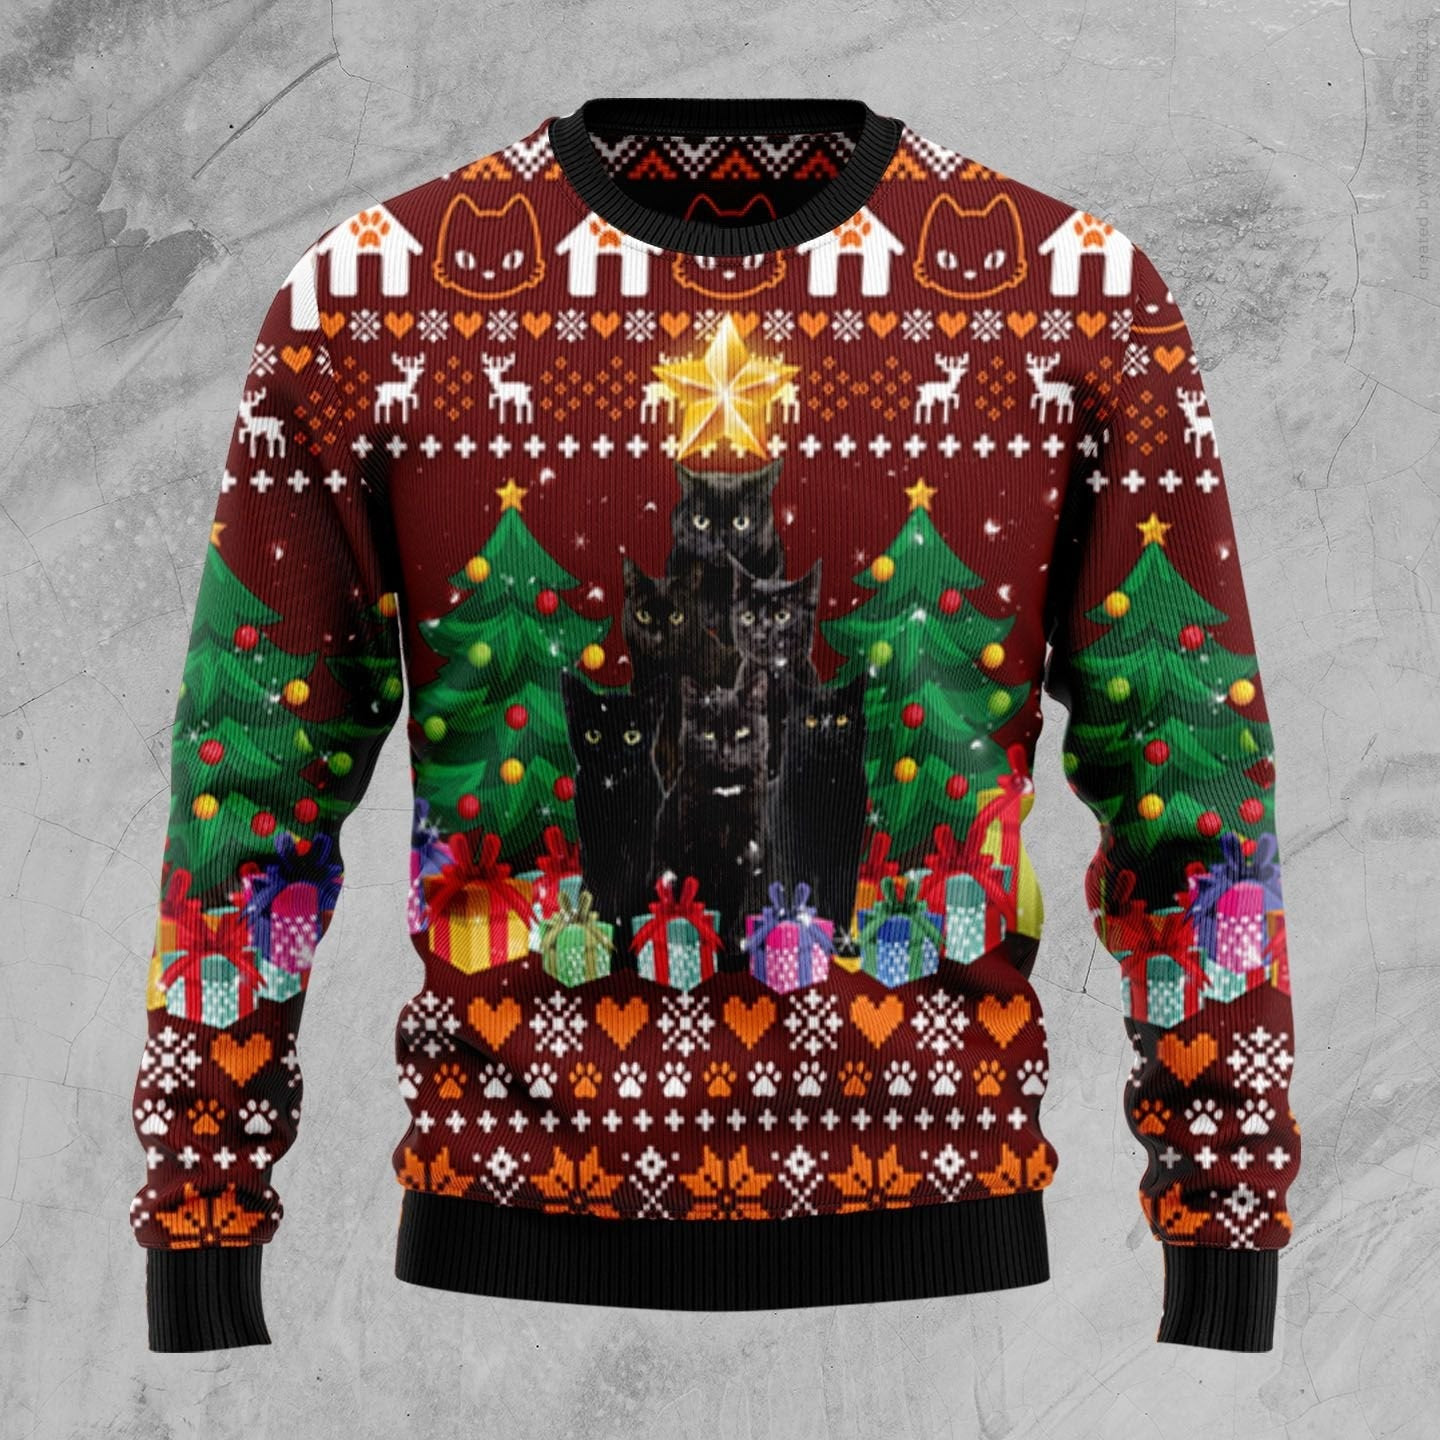 Black Cat Pine Tree Ugly Christmas Sweater Ugly Sweater For Men Women, Holiday Sweater